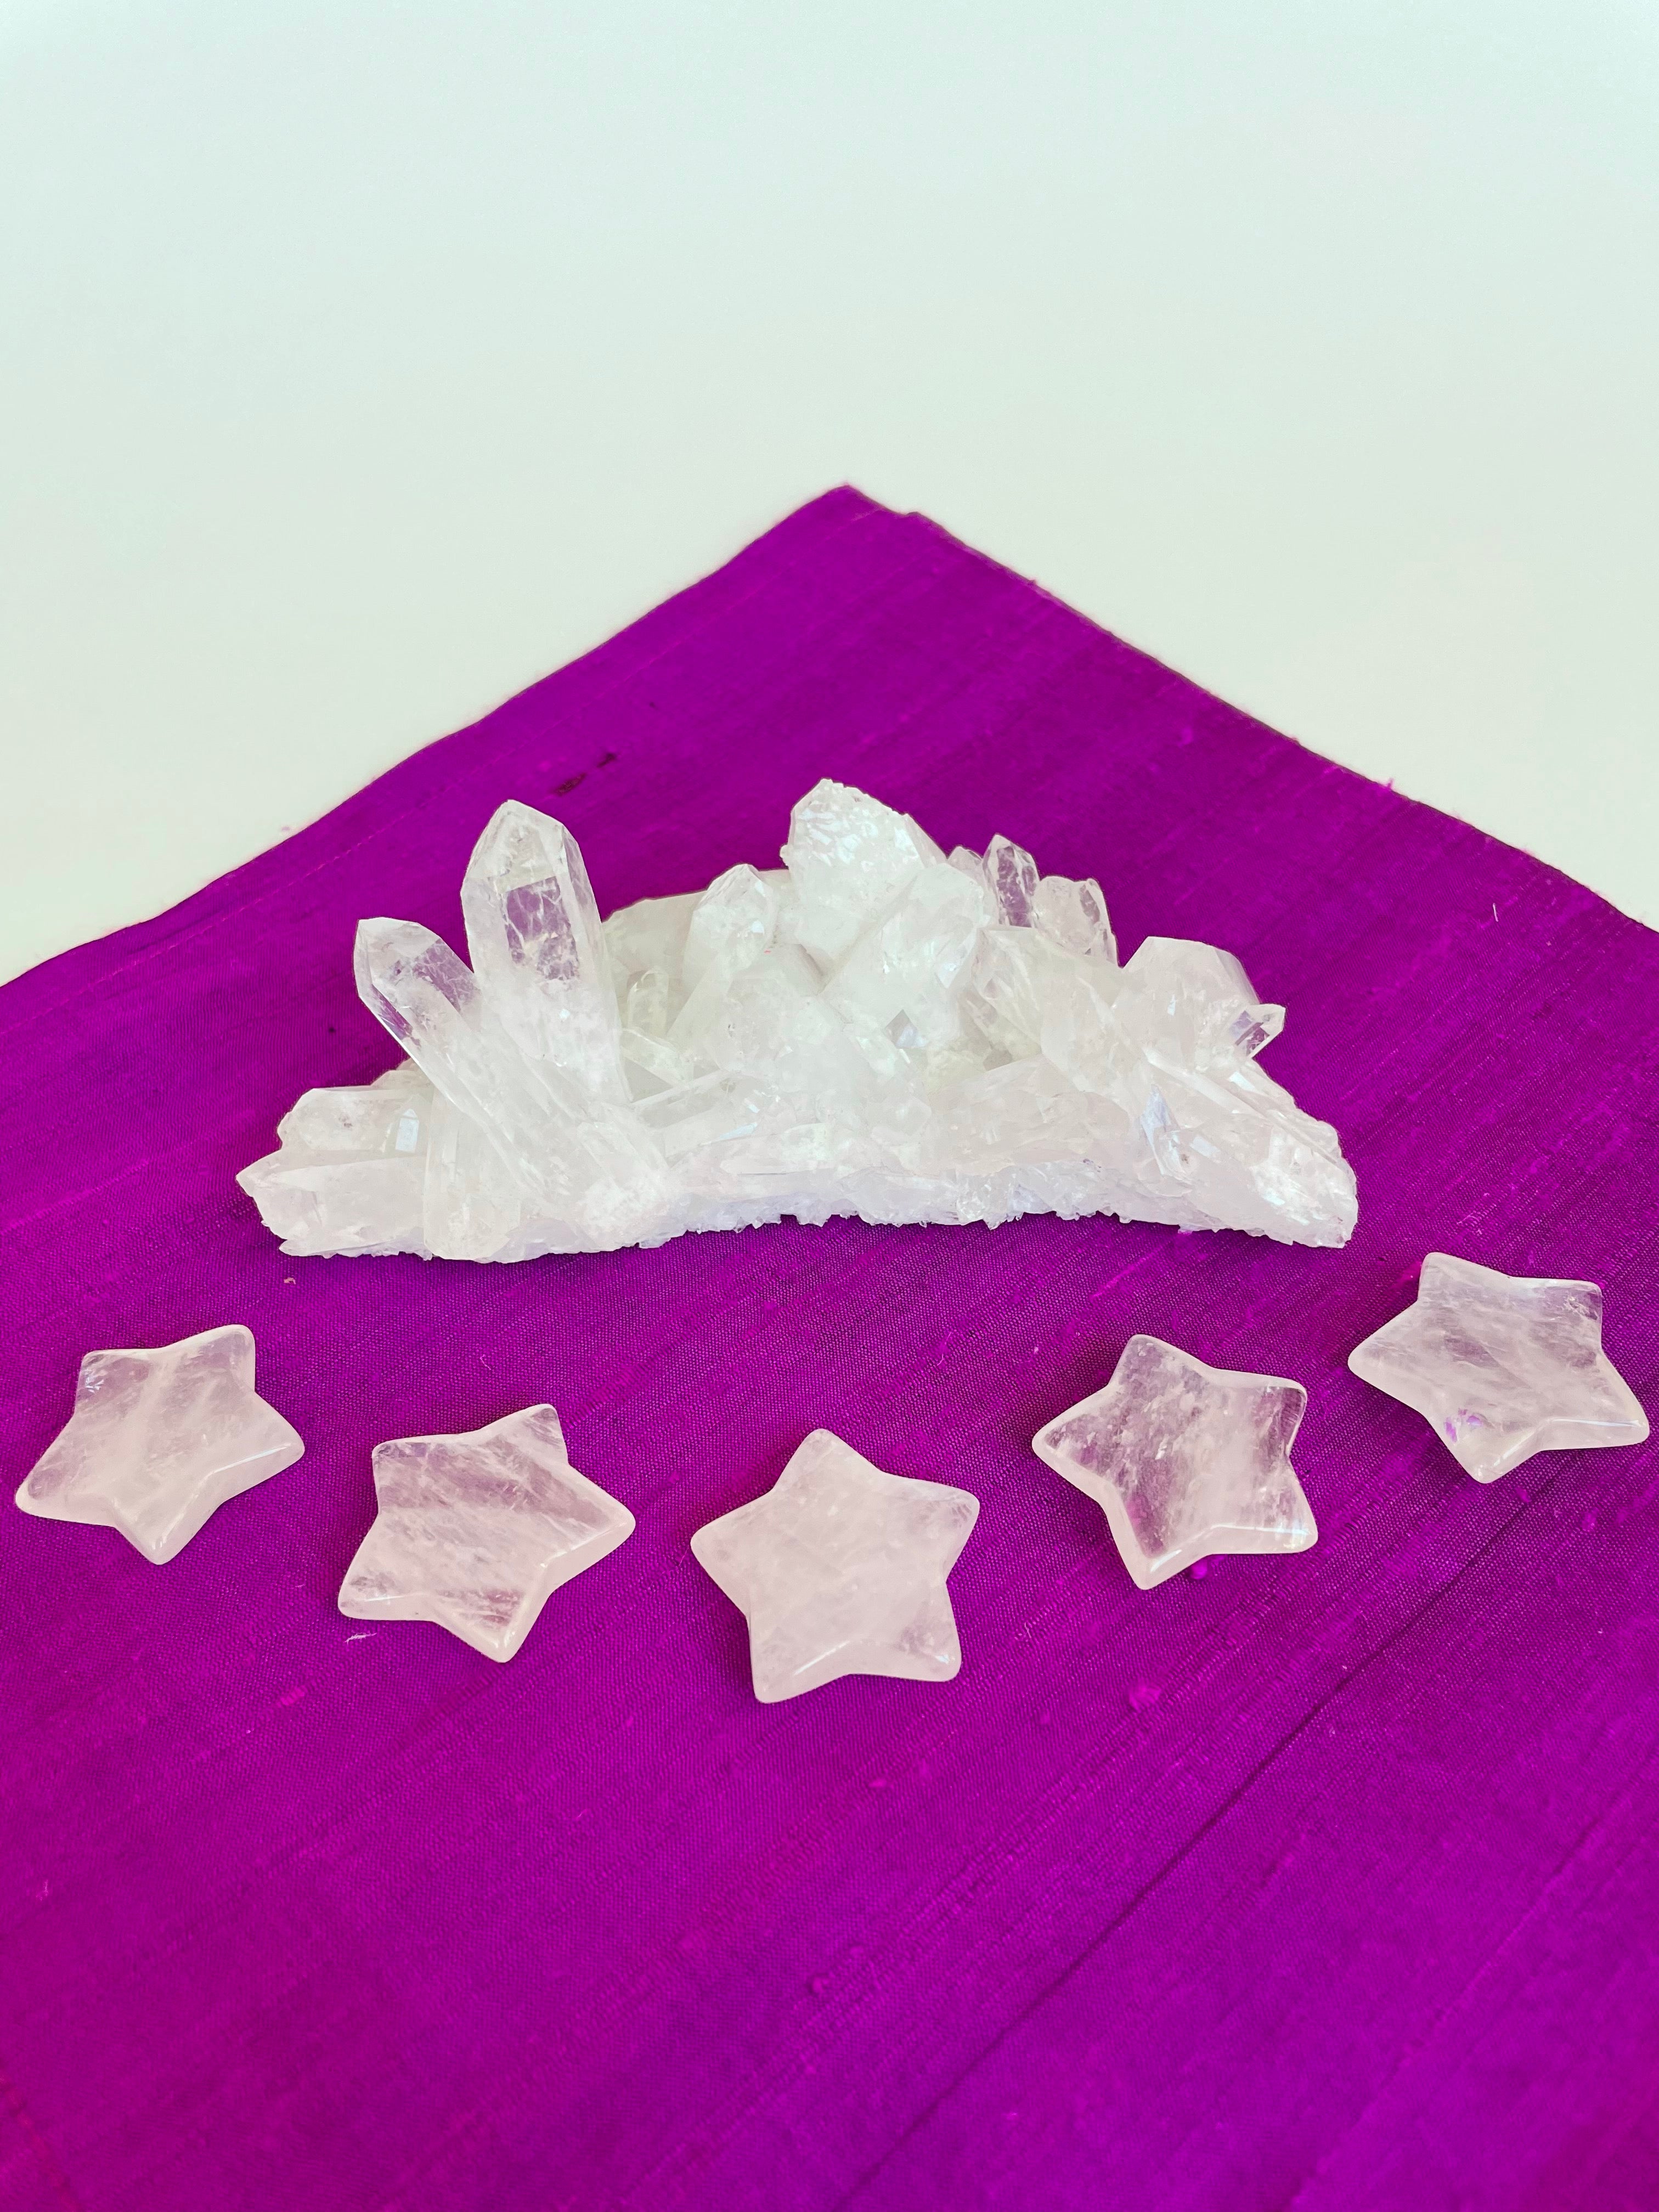 View of several quartz crystal stars. This powerful little quartz crystal star can be used for meditation, healing, for your altar, or as décor for any room in your home or office. Easy to slip right into your pocket so you can take the energy of Quartz everywhere you go. Quartz is the "most powerful healing and energy amplifier on the planet" (Judy Hall). Approximately 1¼". Cost is $6 for one star. 